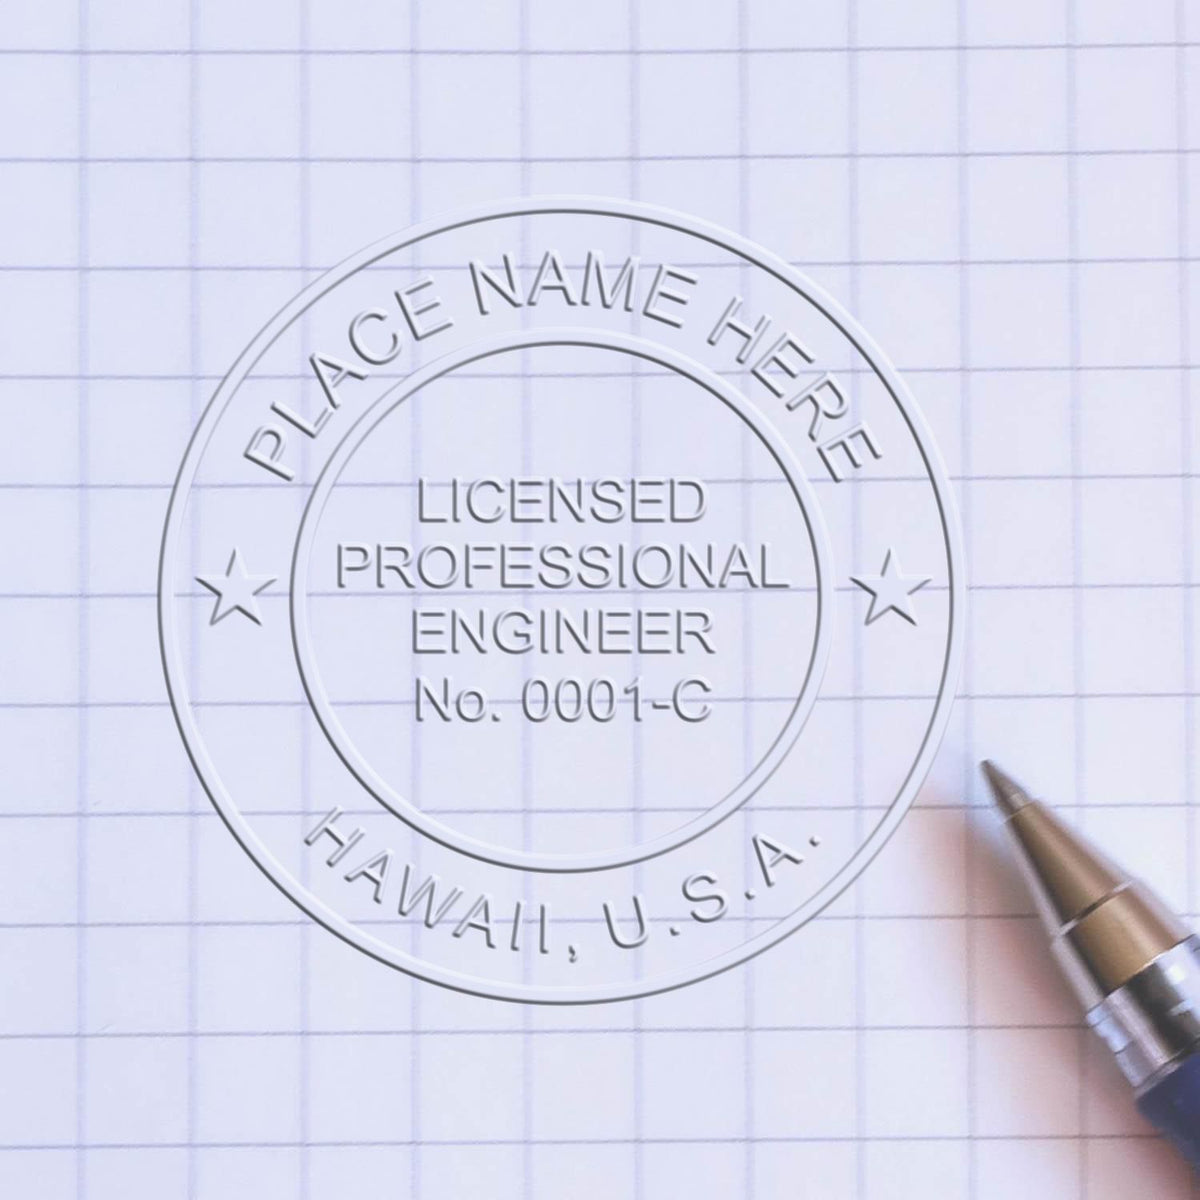 The State of Hawaii Extended Long Reach Engineer Seal stamp impression comes to life with a crisp, detailed photo on paper - showcasing true professional quality.